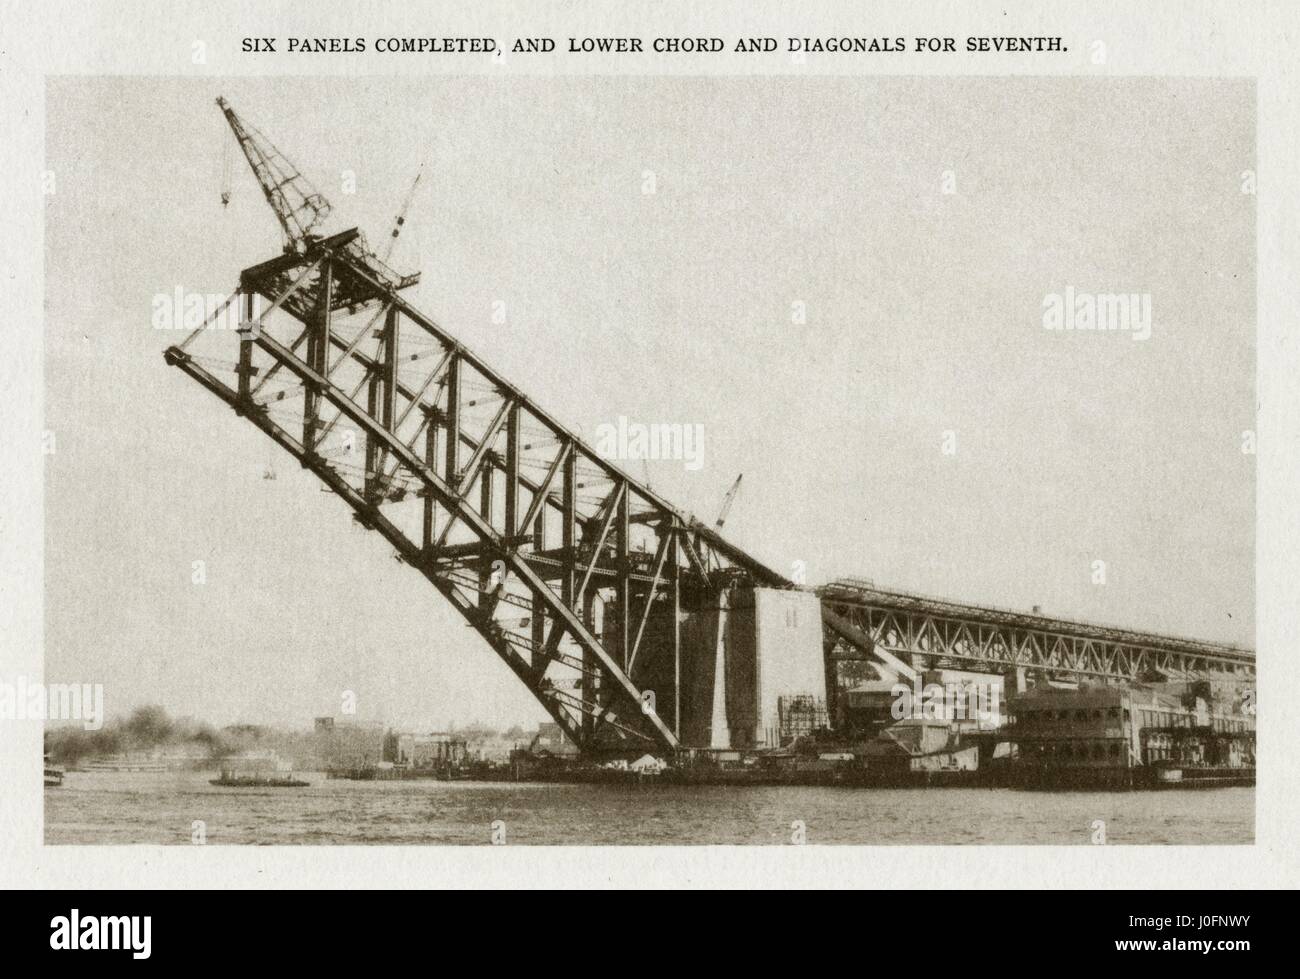 Sydney Harbour Bridge under construction: 6 panels completed, and lower chord and diagonals for 7th Stock Photo